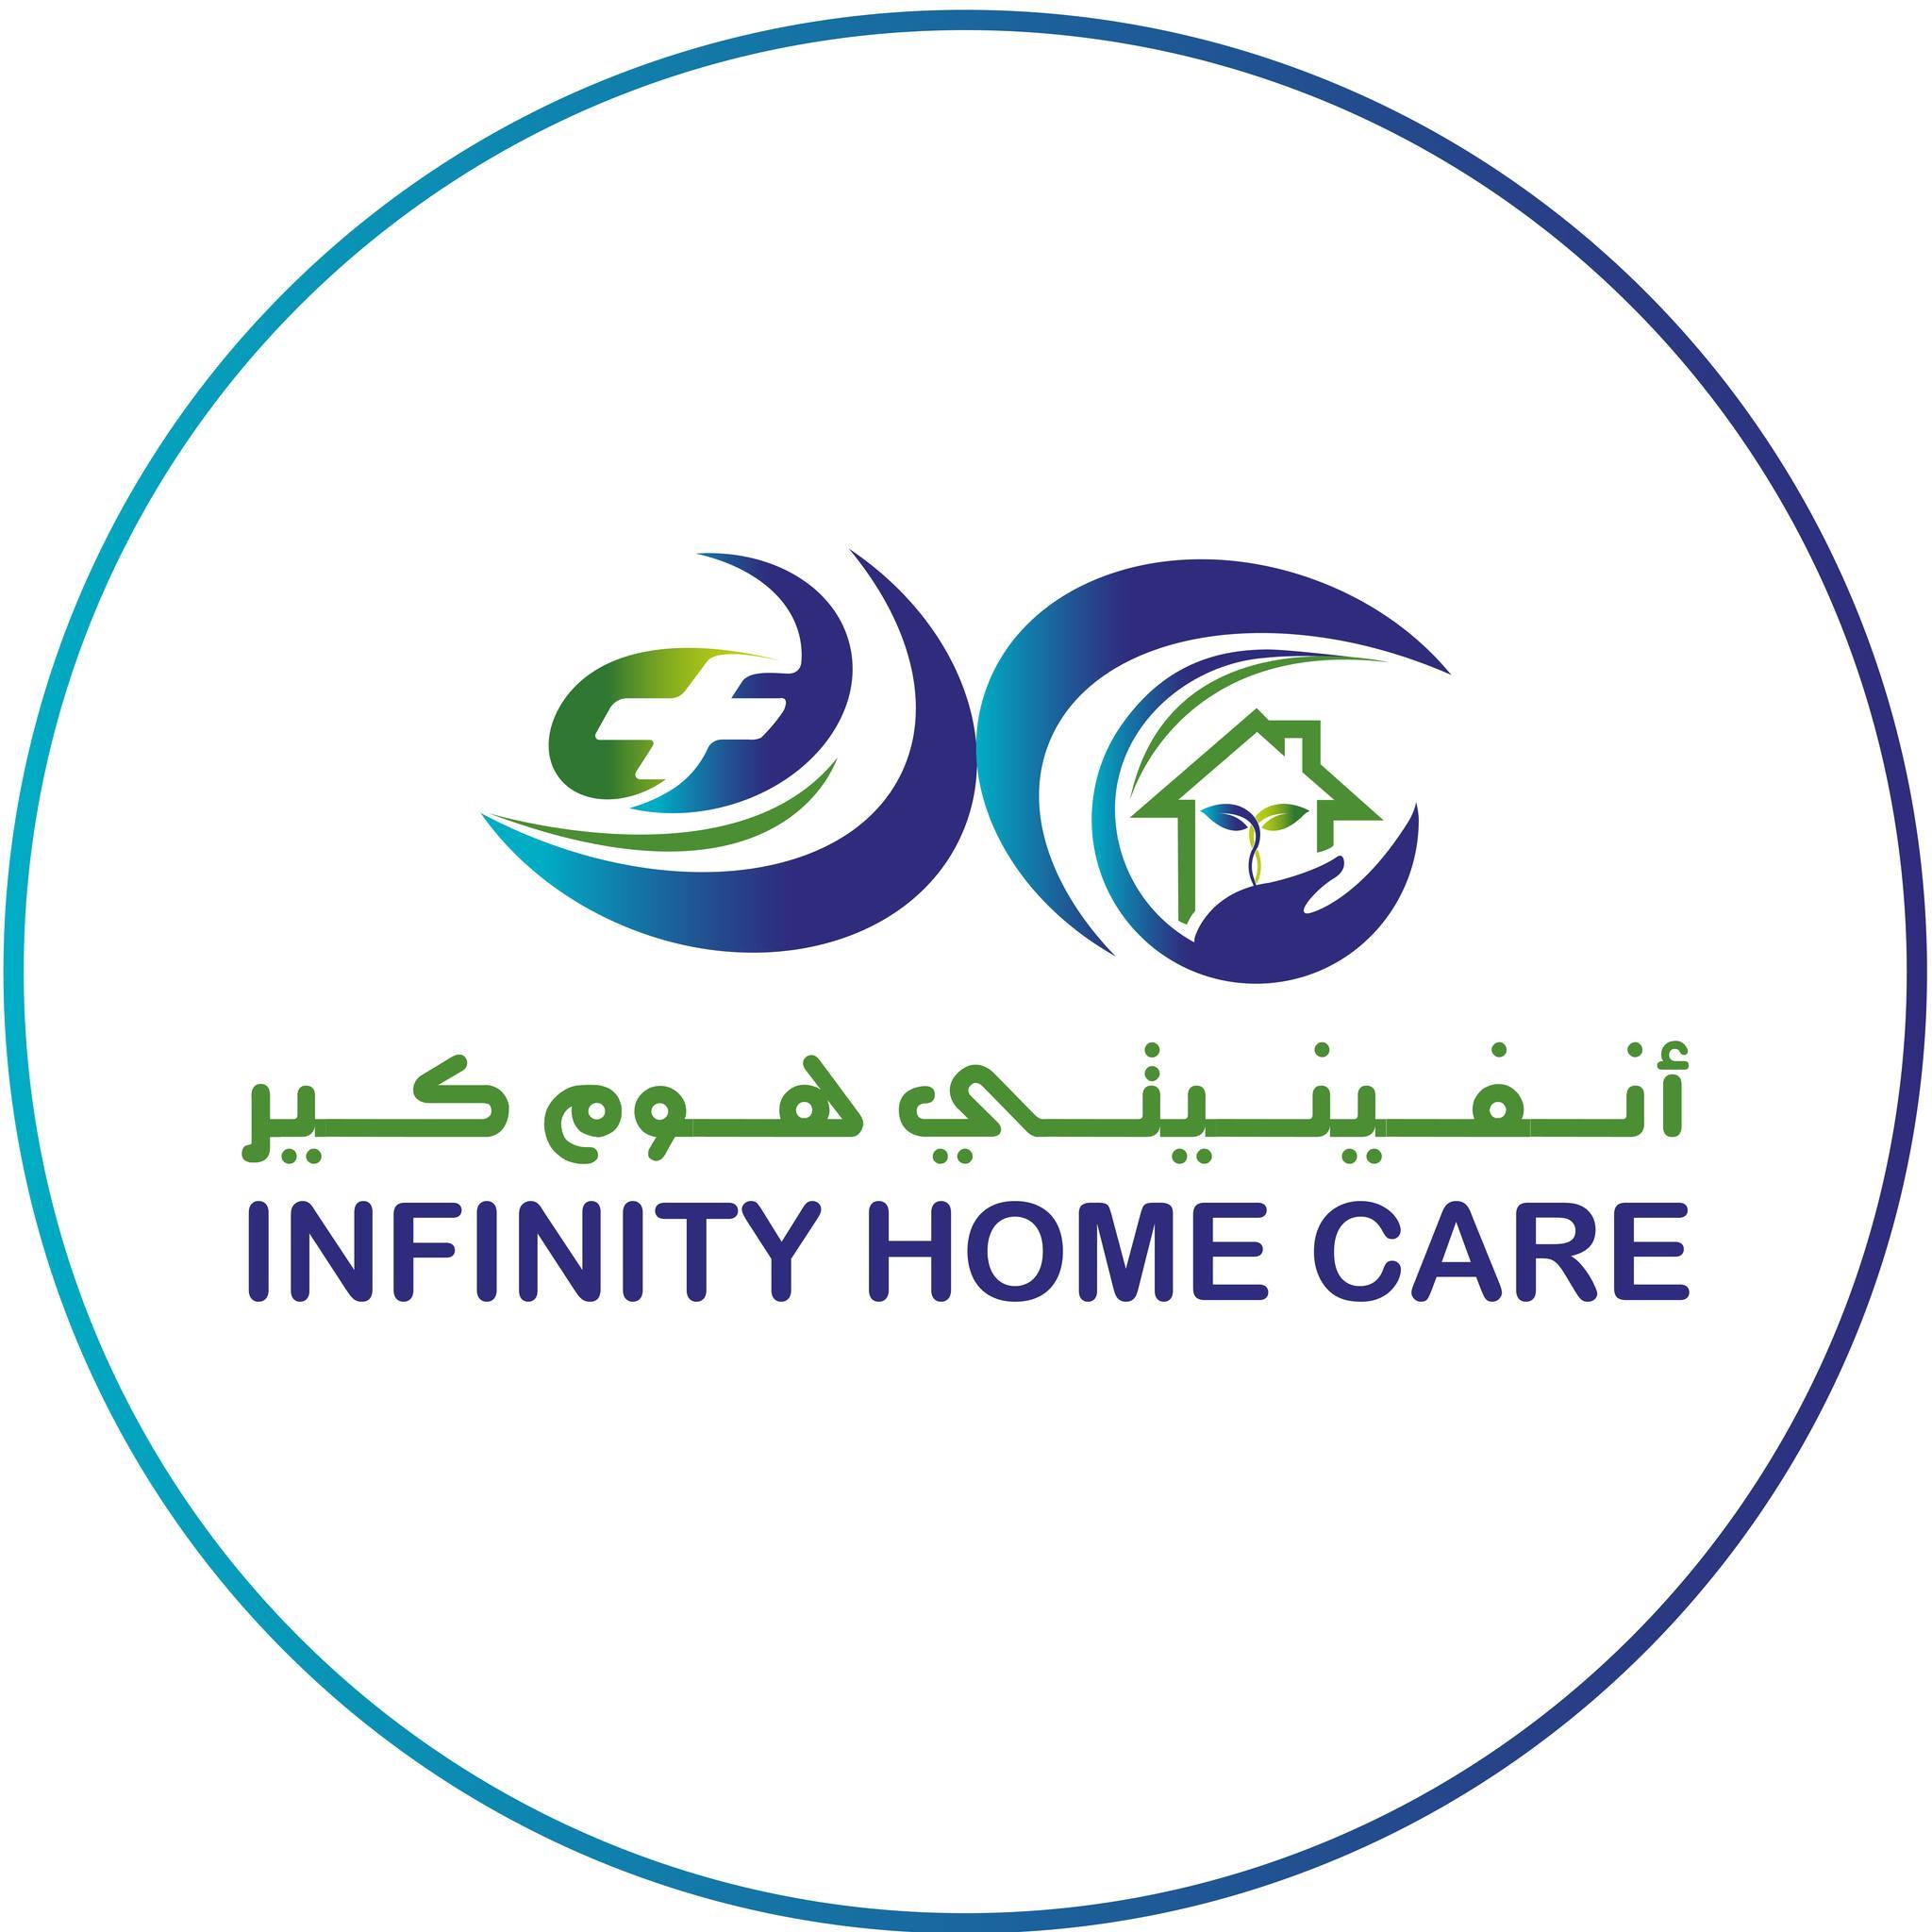 INFINITY HOME CARE